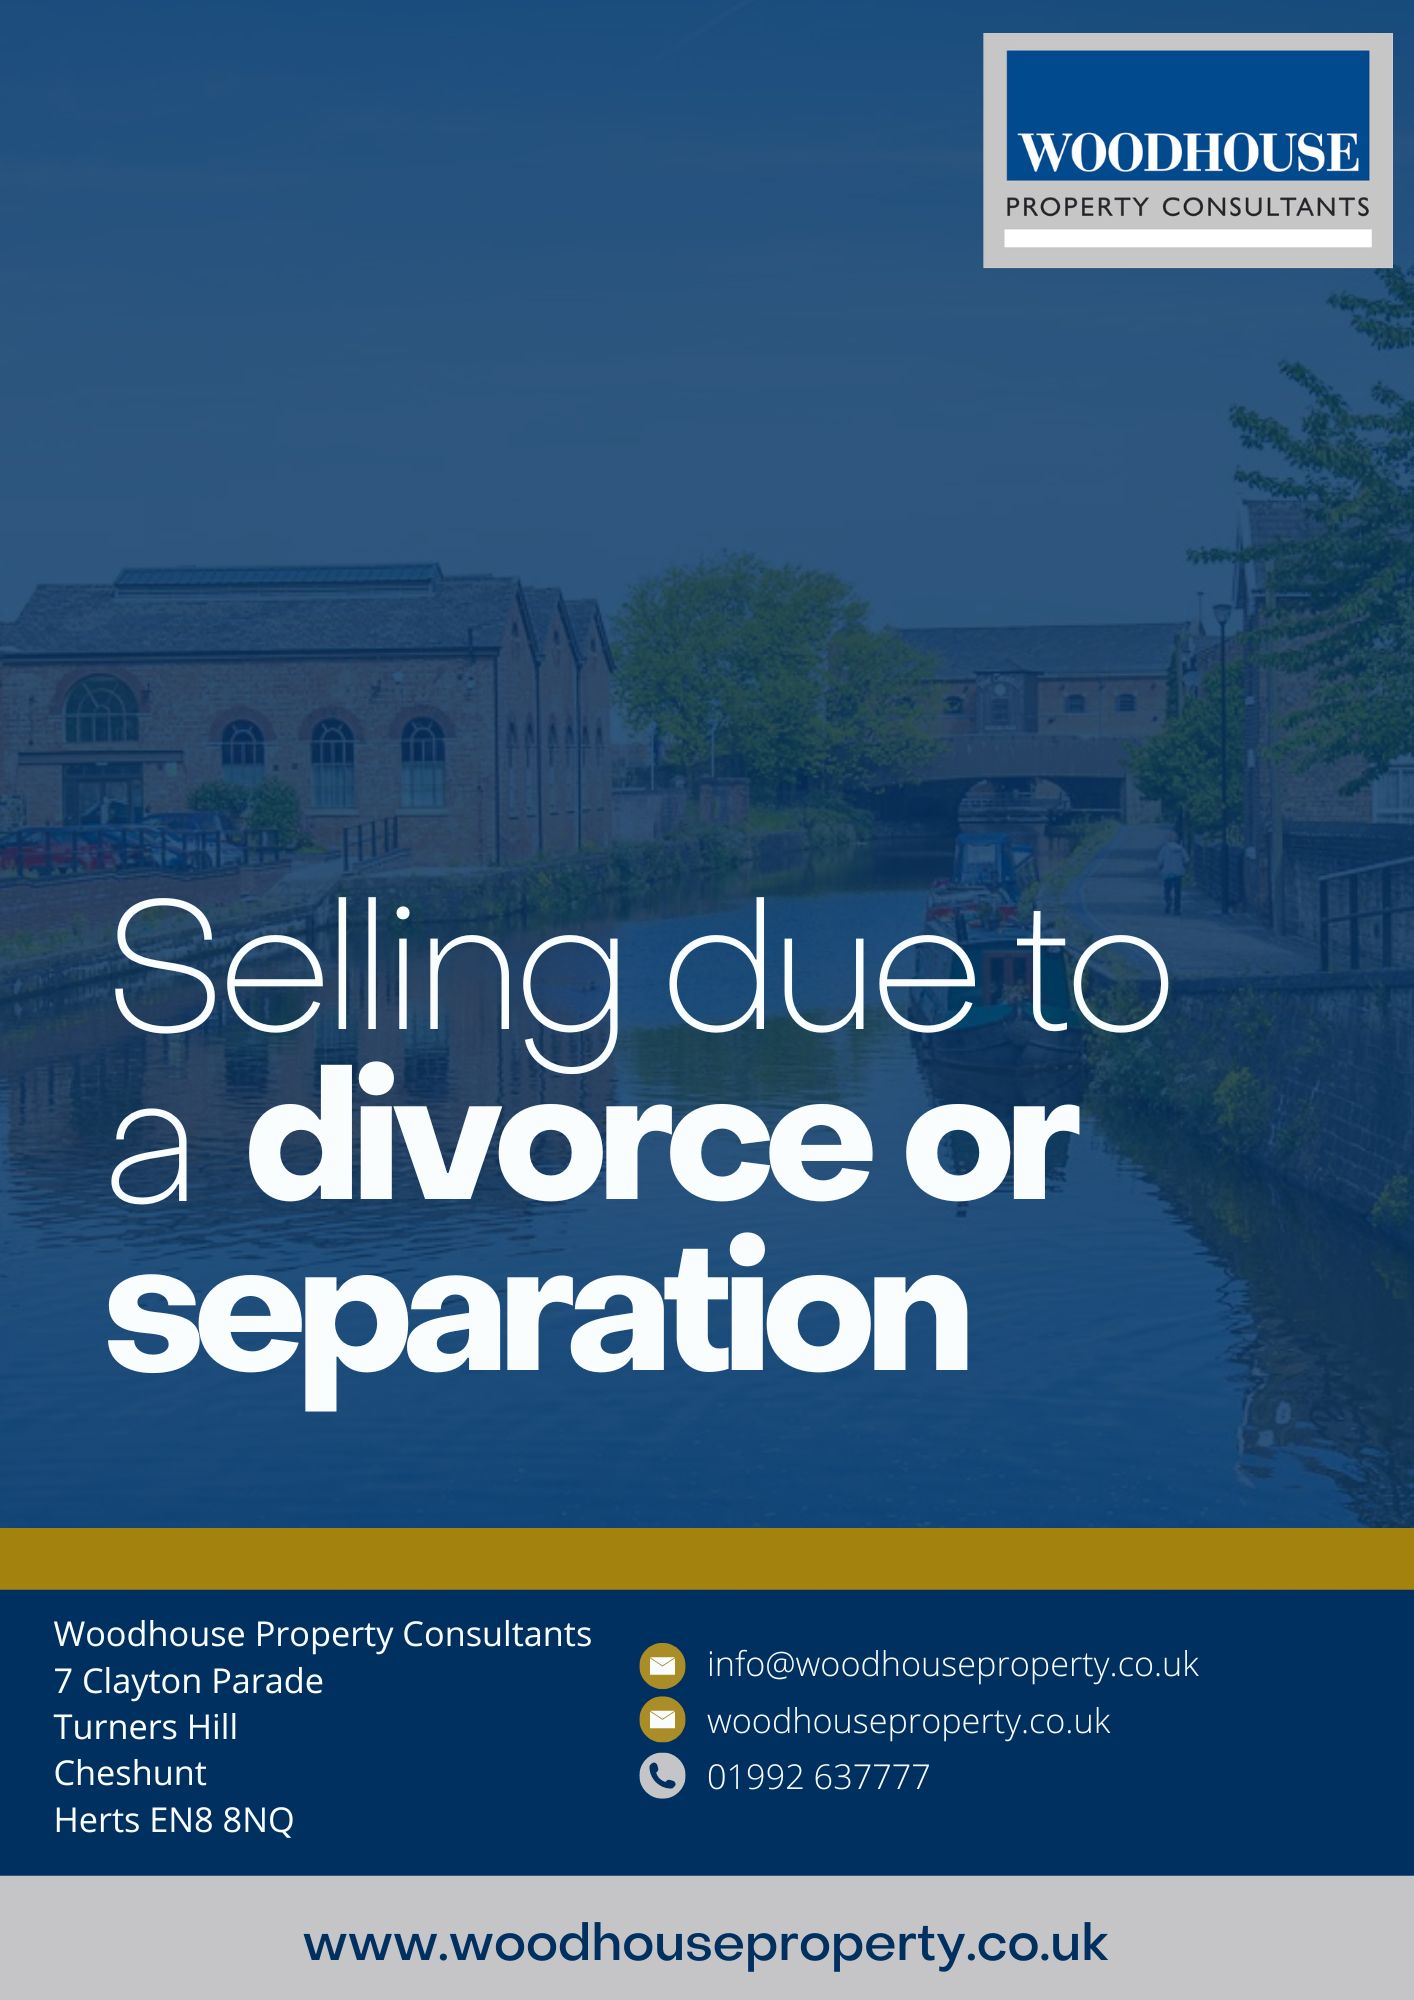 Guide to Selling Due to Divorce or Seperation